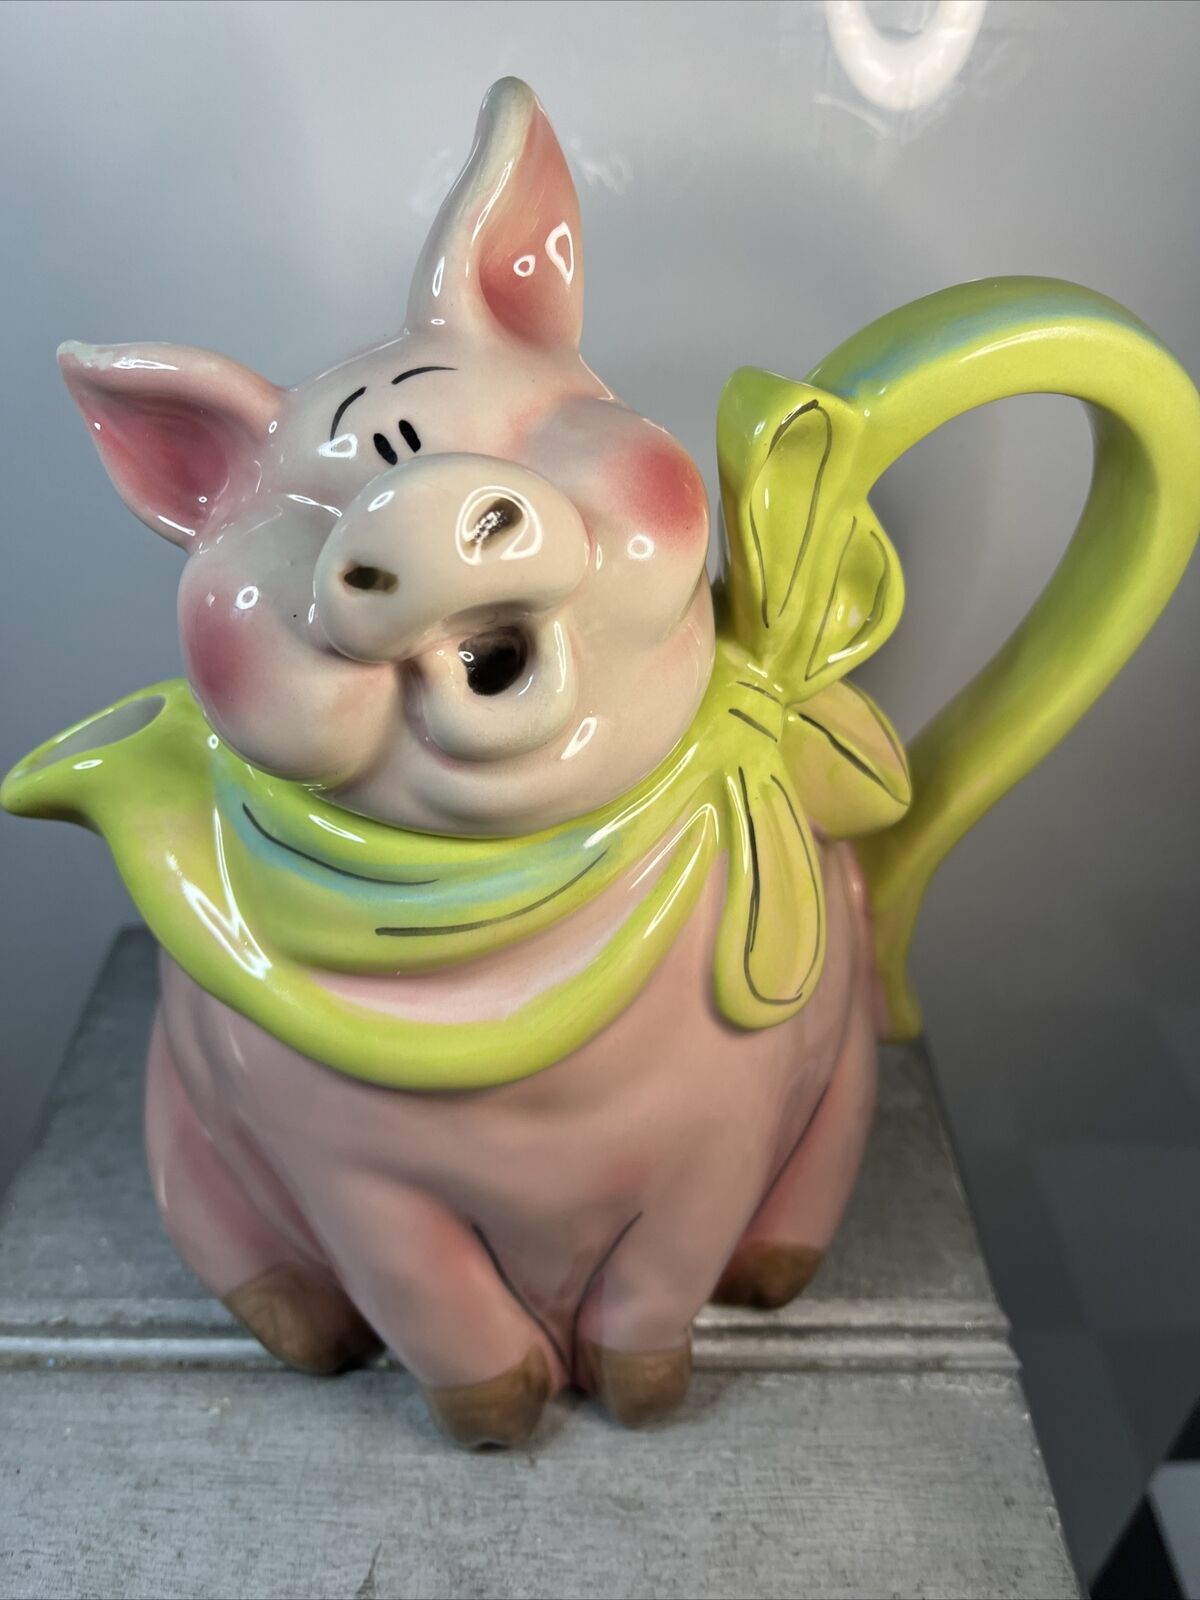 Pig / Piggy Teapot Blue Sky Ceramic Hand Painted 2011 Collectible Display